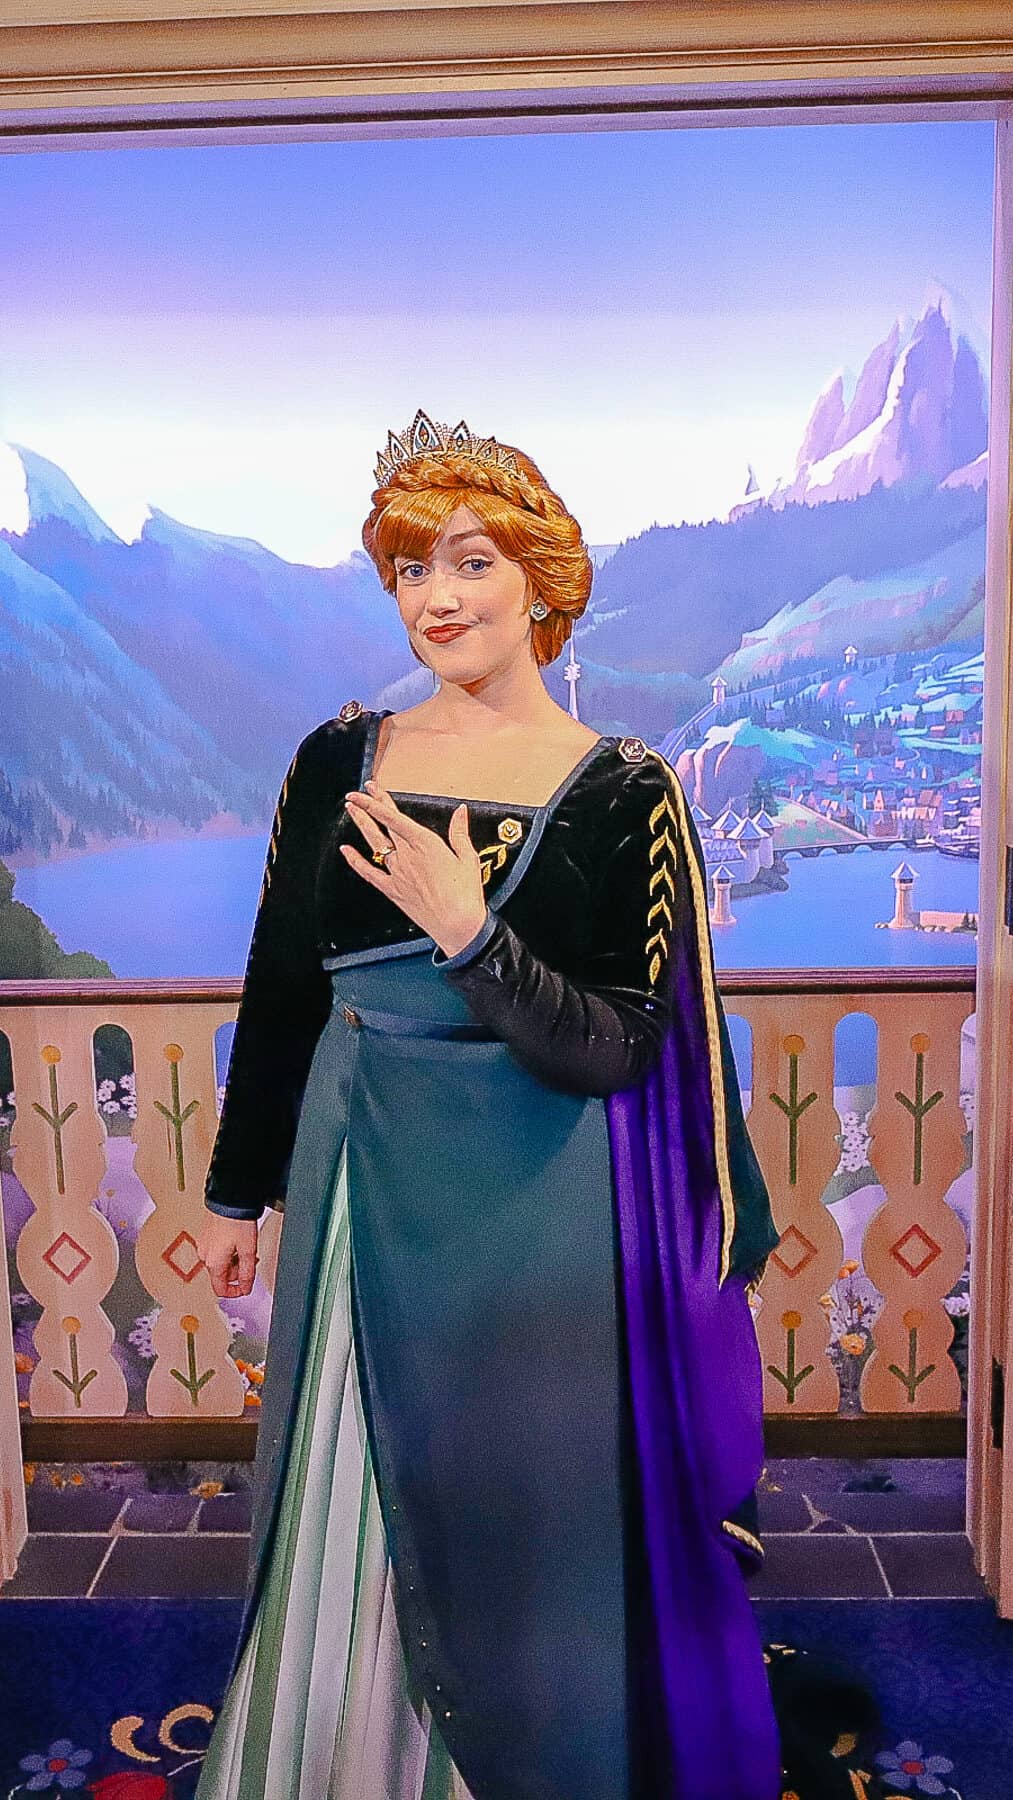 Anna poses with her fingers crossed wearing her queen costume. 